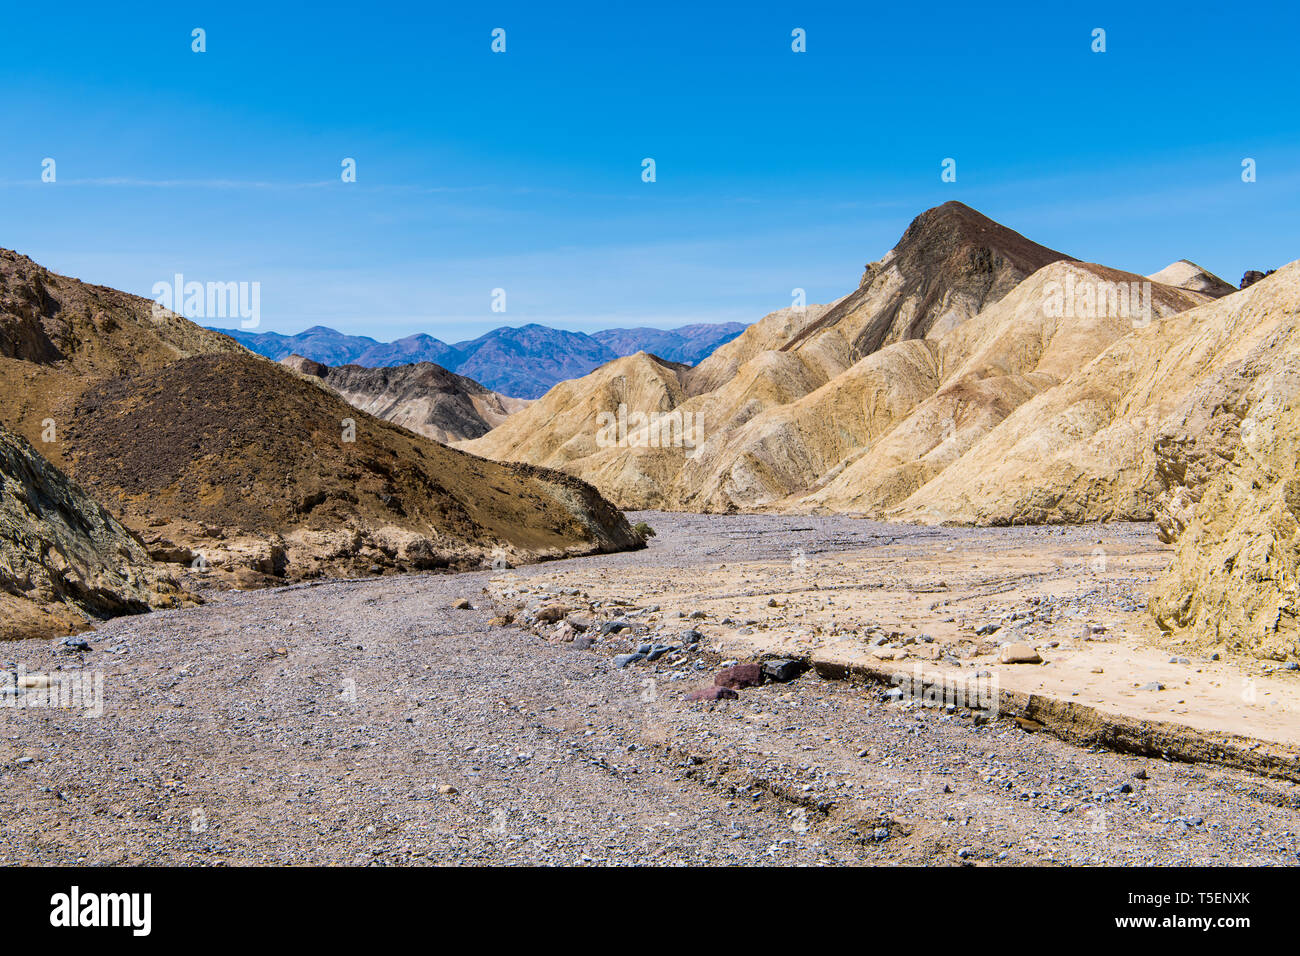 A dry rocky riverbed curves through a barren desert landscape of colorful badlands and peaks in Death Valley National Park Stock Photo